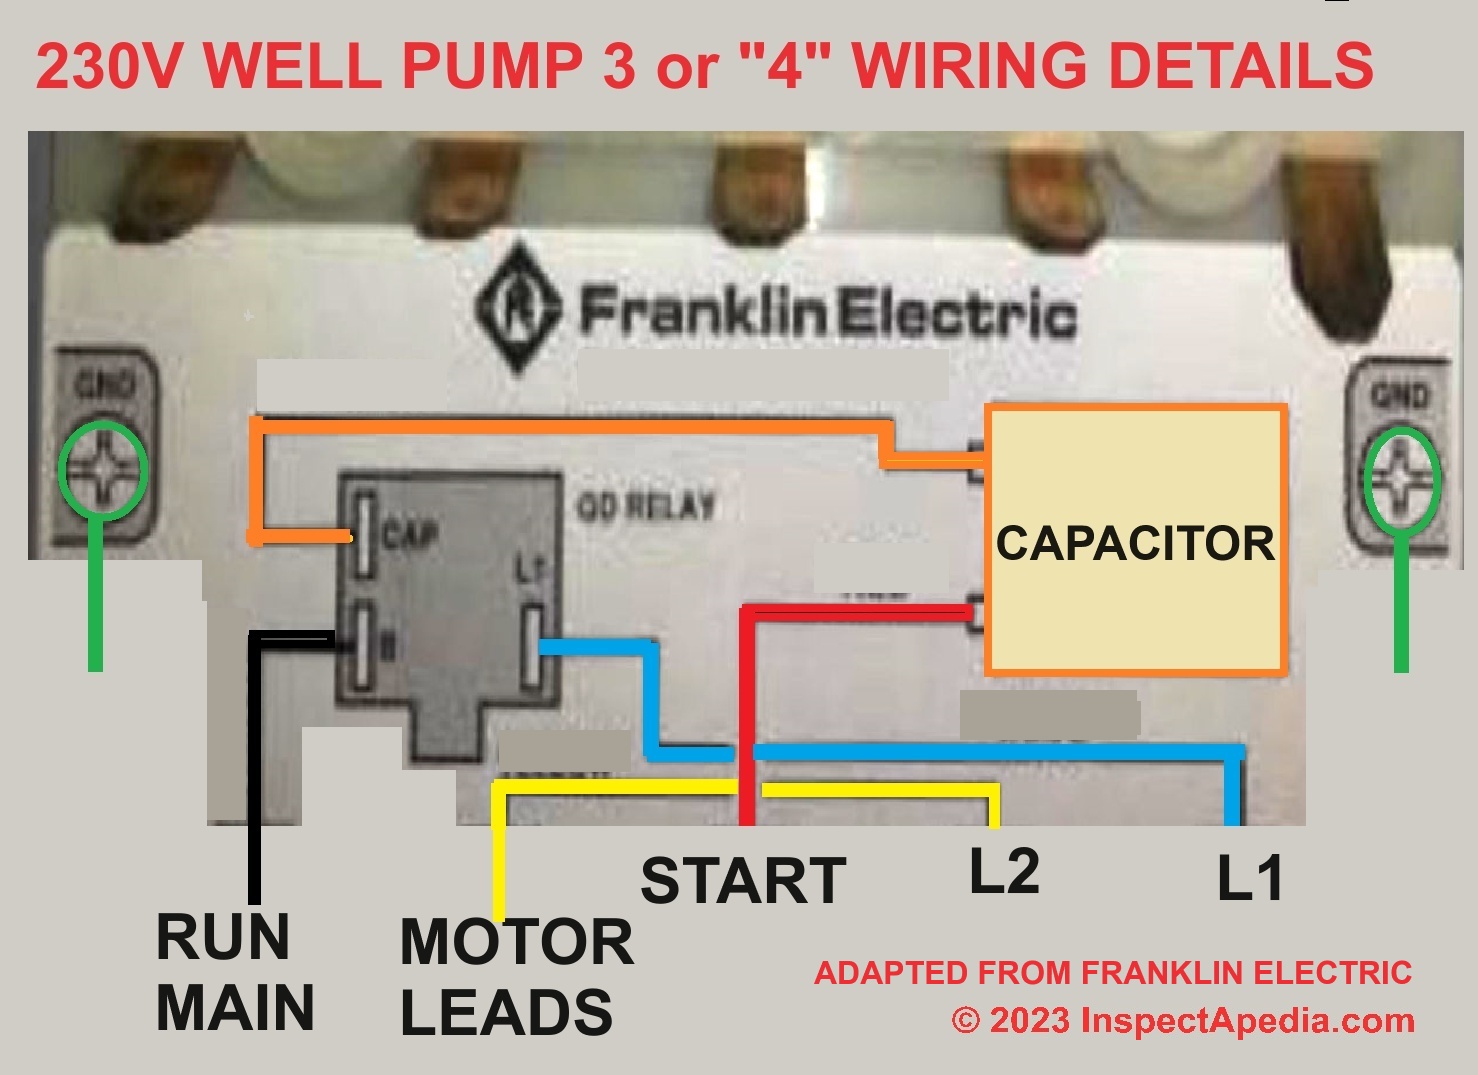 Water Pump Wiring Troubleshooting & Repair Install or detect & fix